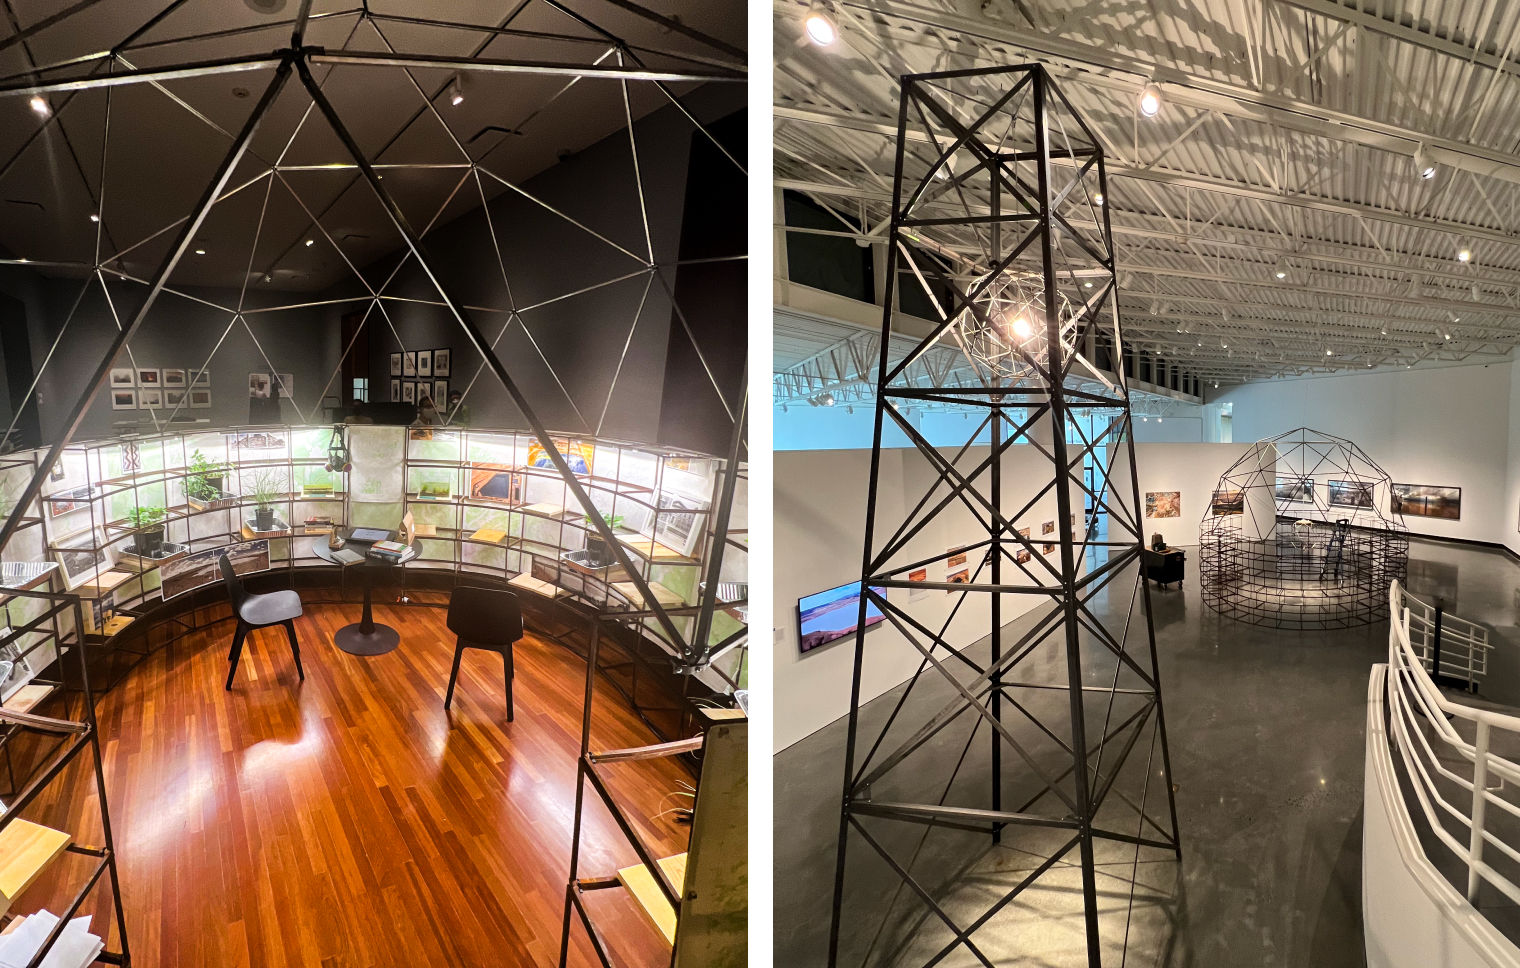 Composite image of hogan filled with plants and photographs and a tower structure placed inside a gallery surrounded by photographs